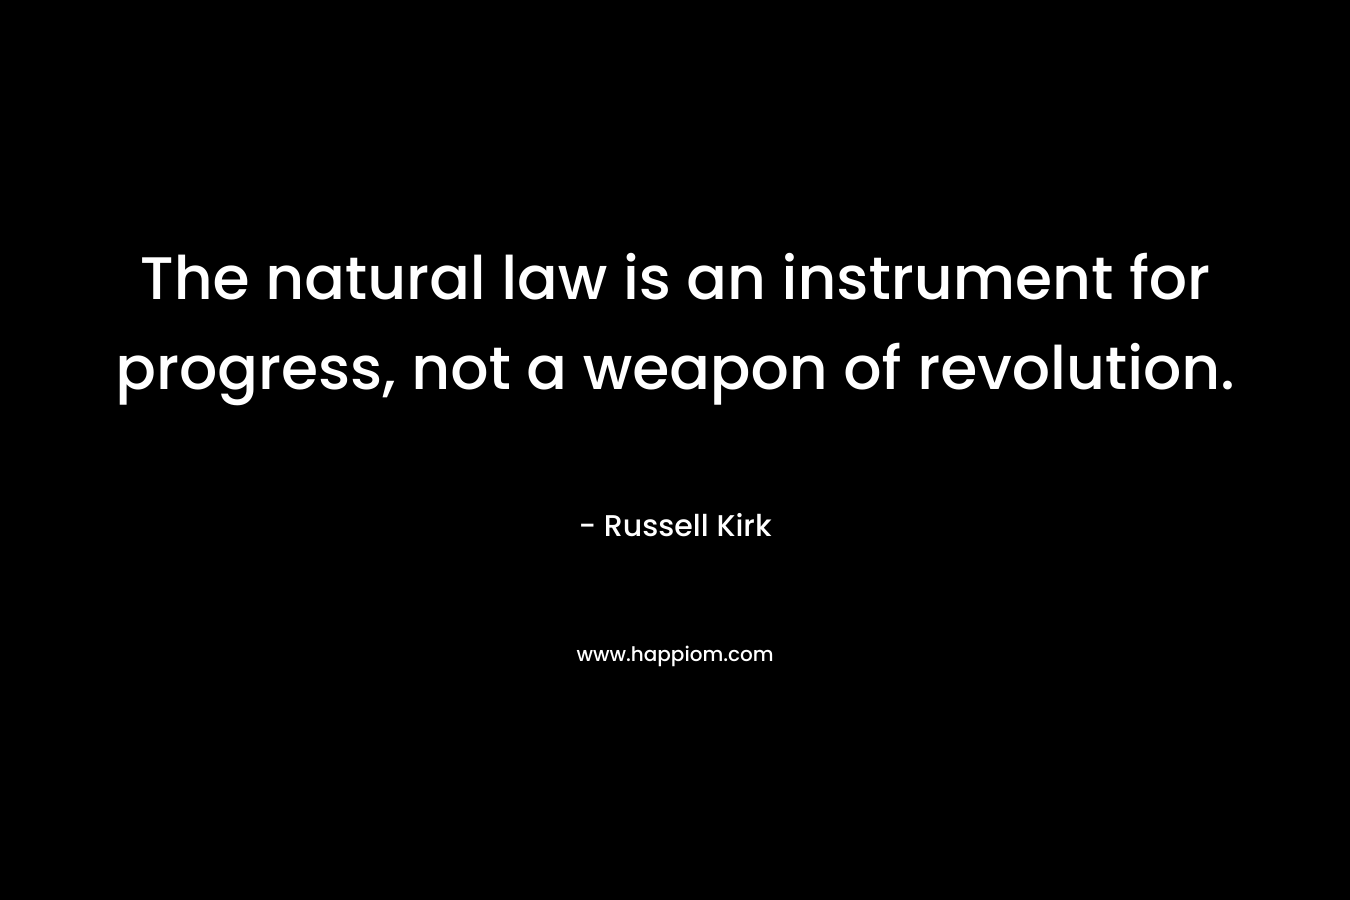 The natural law is an instrument for progress, not a weapon of revolution.